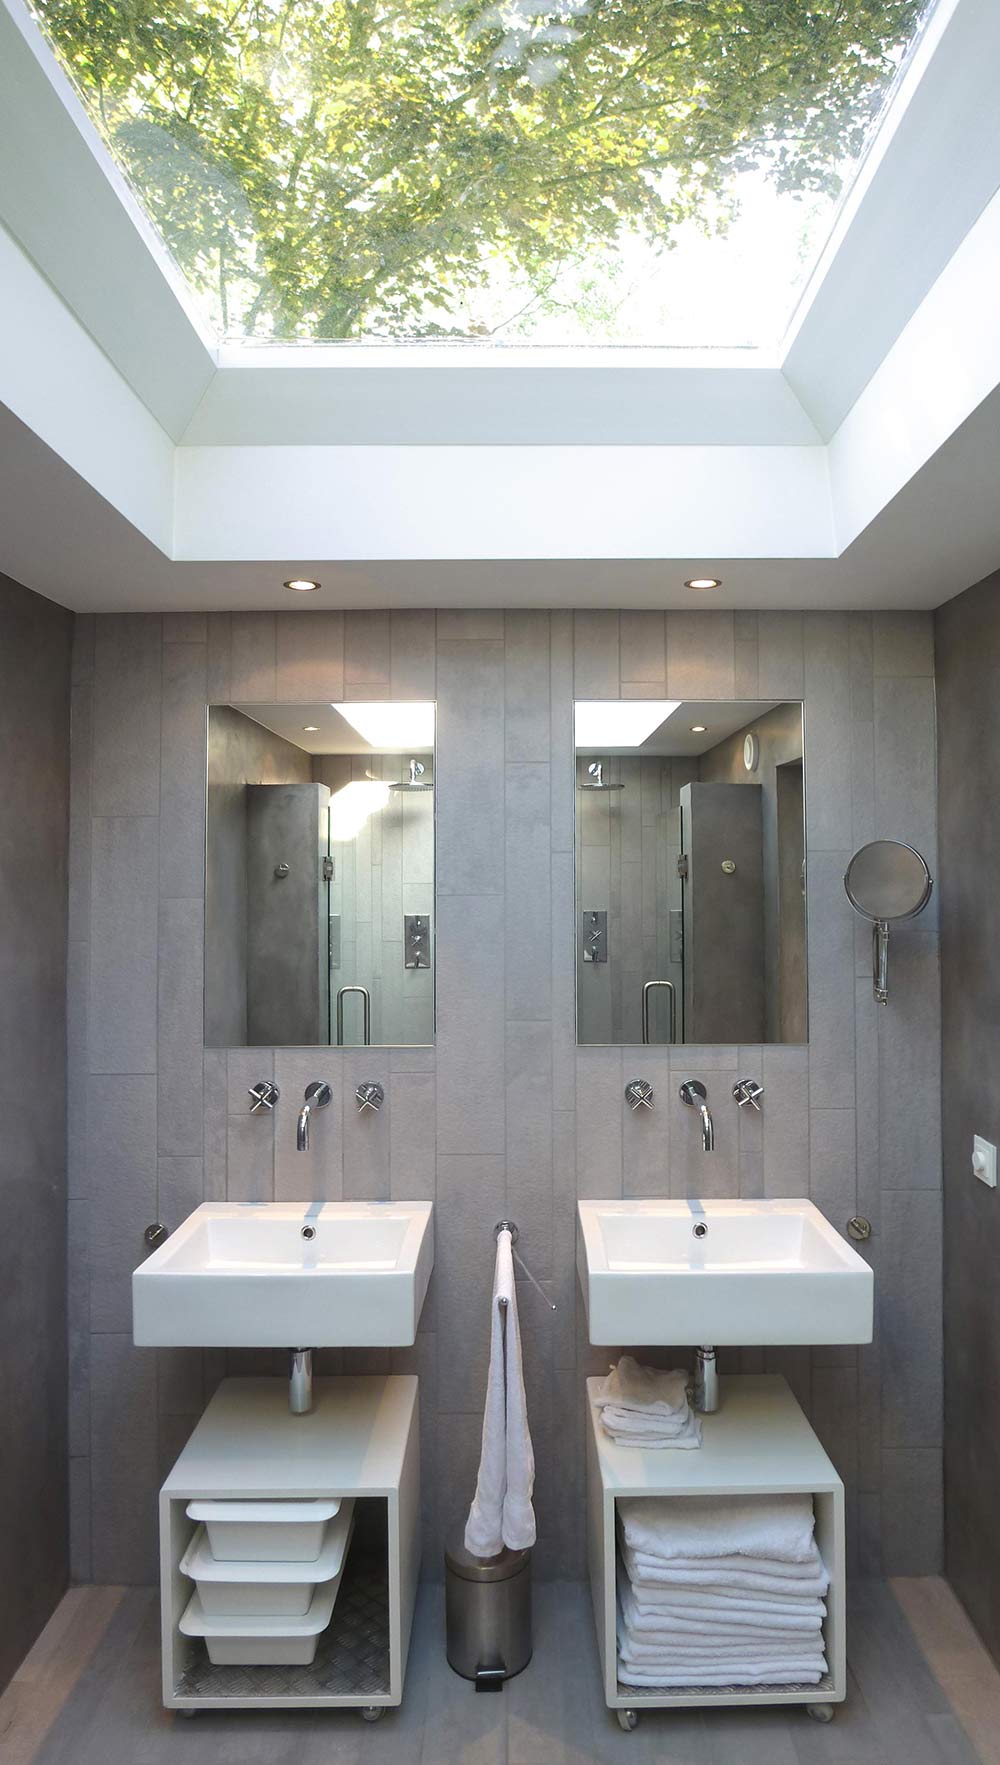 Grey Bathroom, Double Sinks & Showers, Unique Loft Conversion in The Netherlands